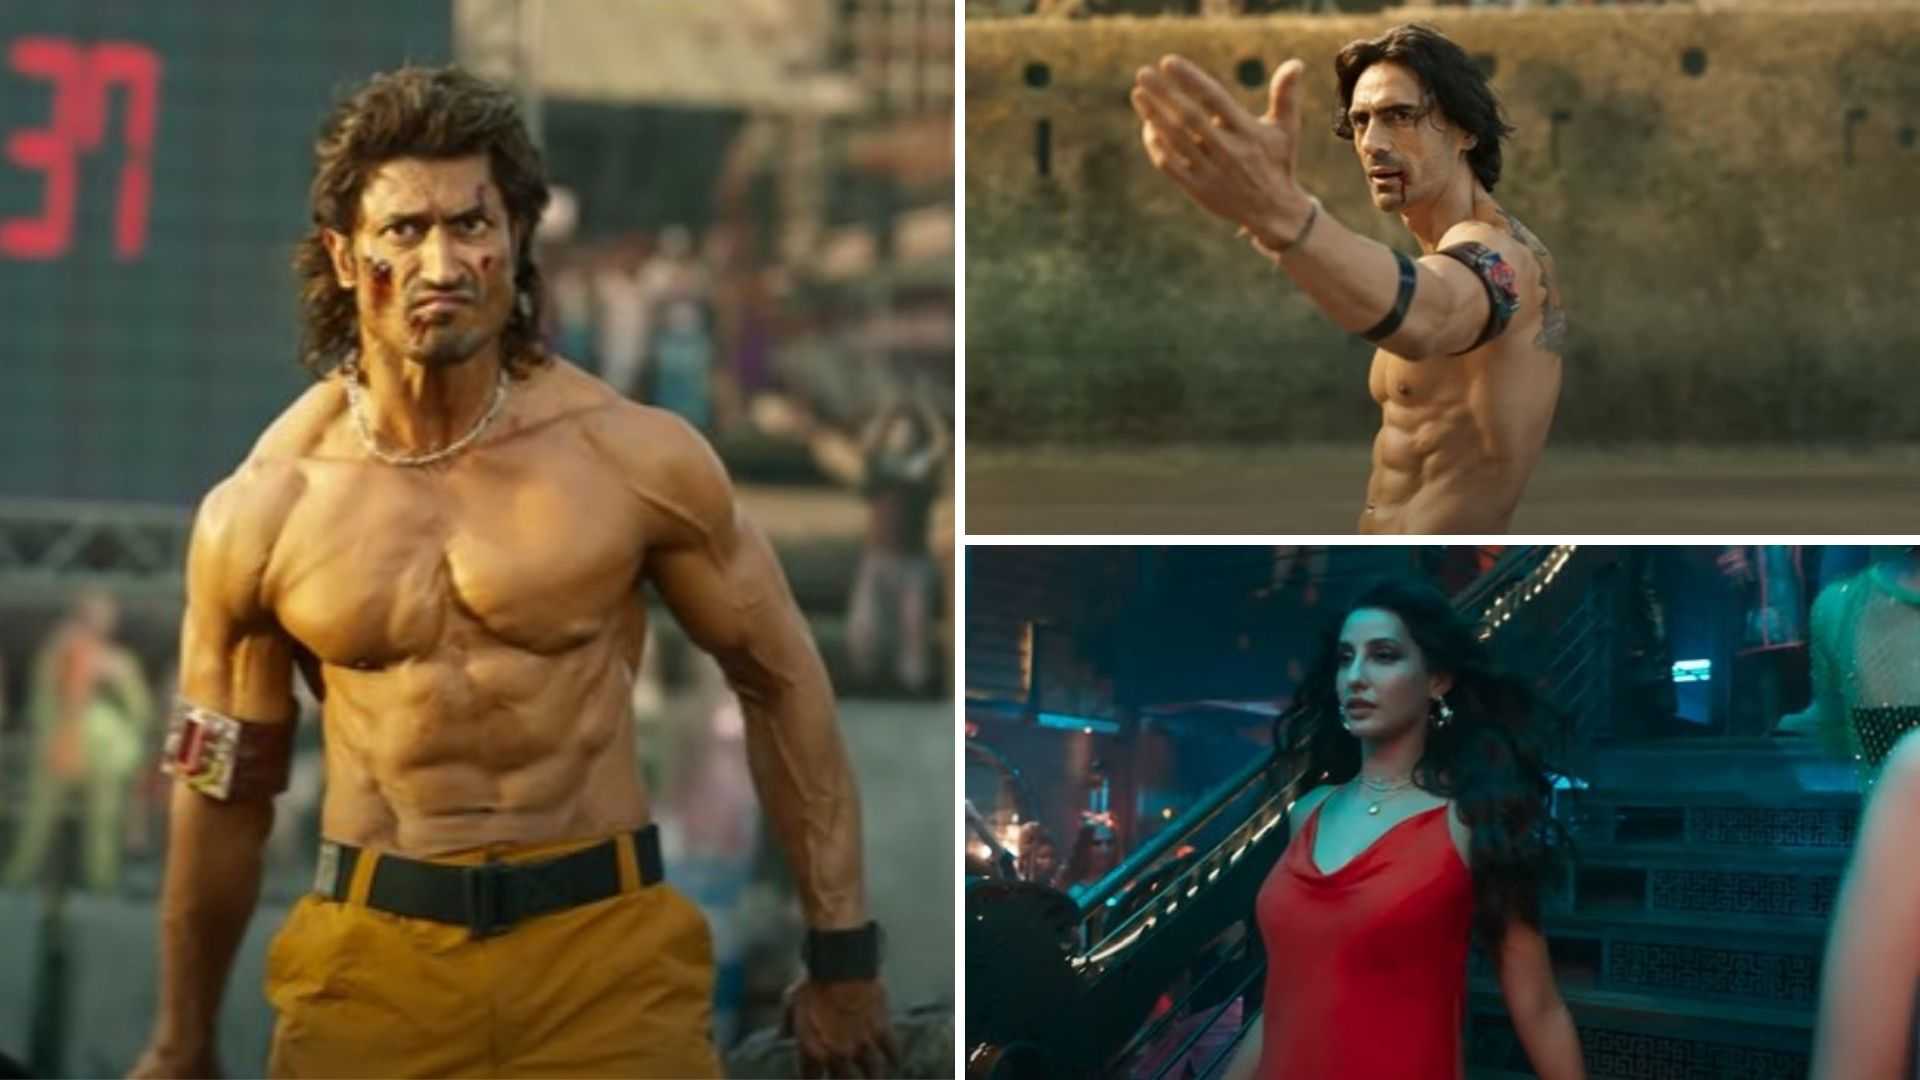 Crackk Trailer: Vidyut Jammwal's revenge drama is high on action and lots of dialoguebaazi, watch